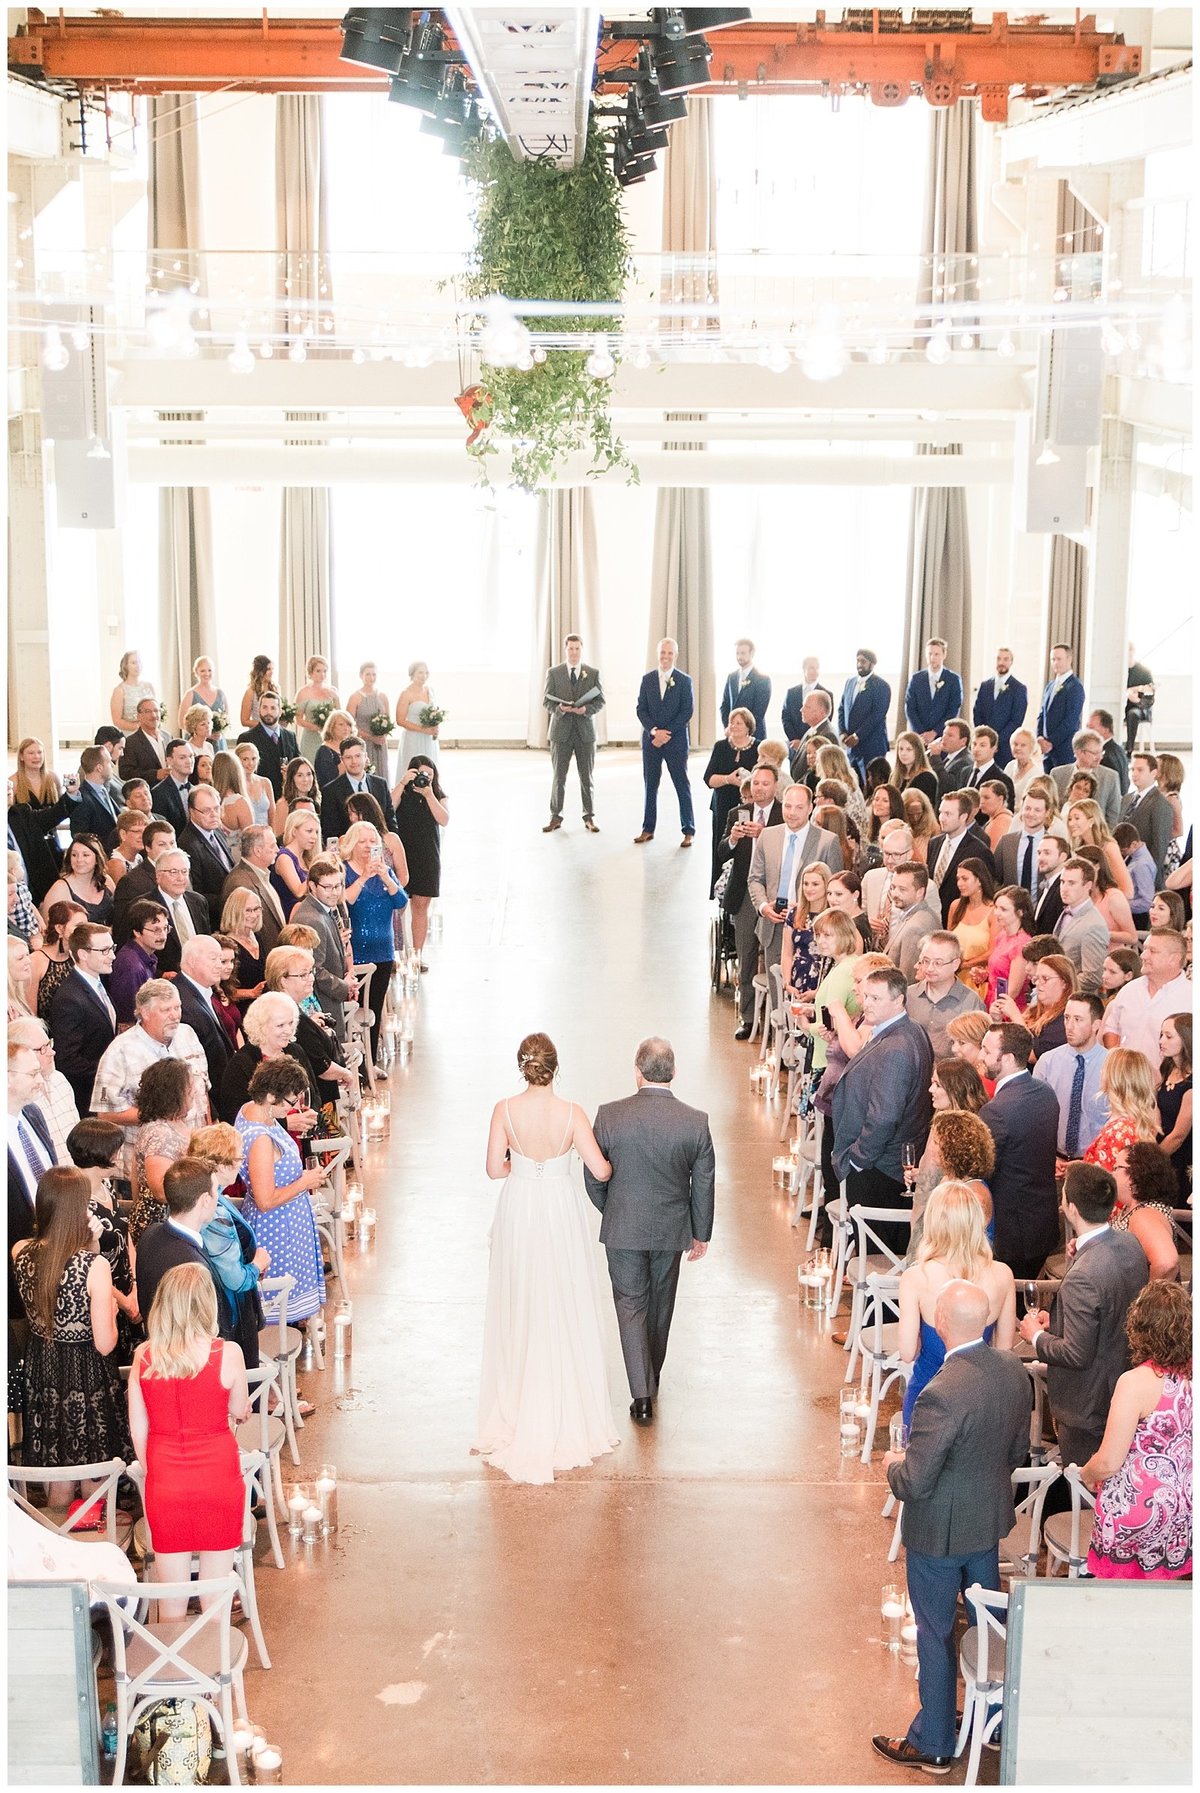 Mattea Rose Photography is a Minneapolis and Phoenix based wedding photographer. Mattea Rose Photography is a luxury Minnesota and Arizona wedding photographer.